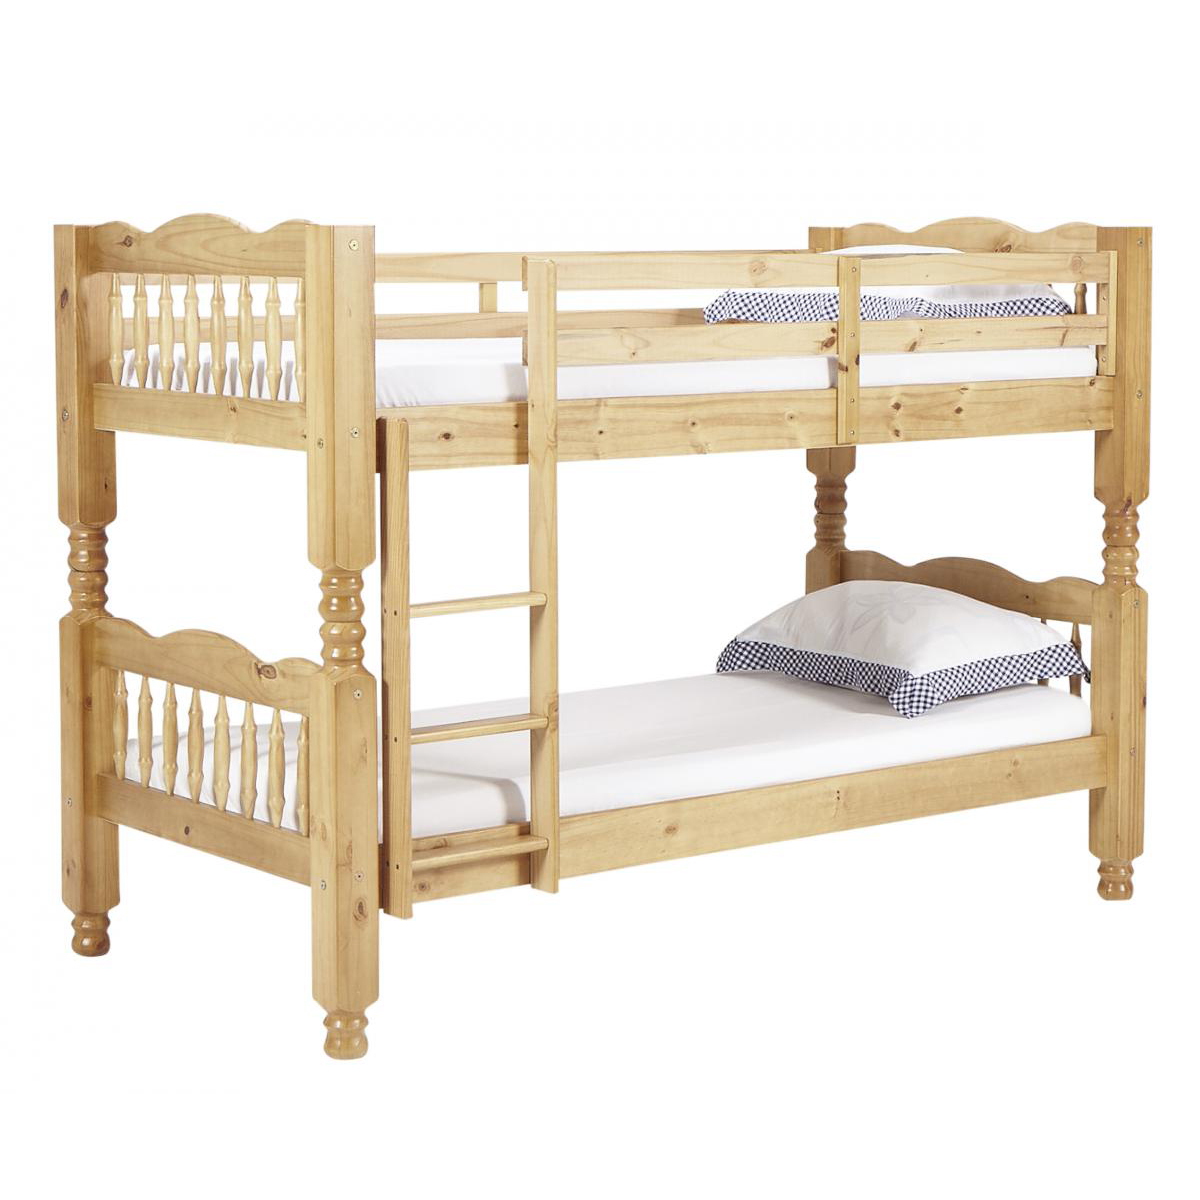 Trieste Chunky Pine Wooden Bunk Bed